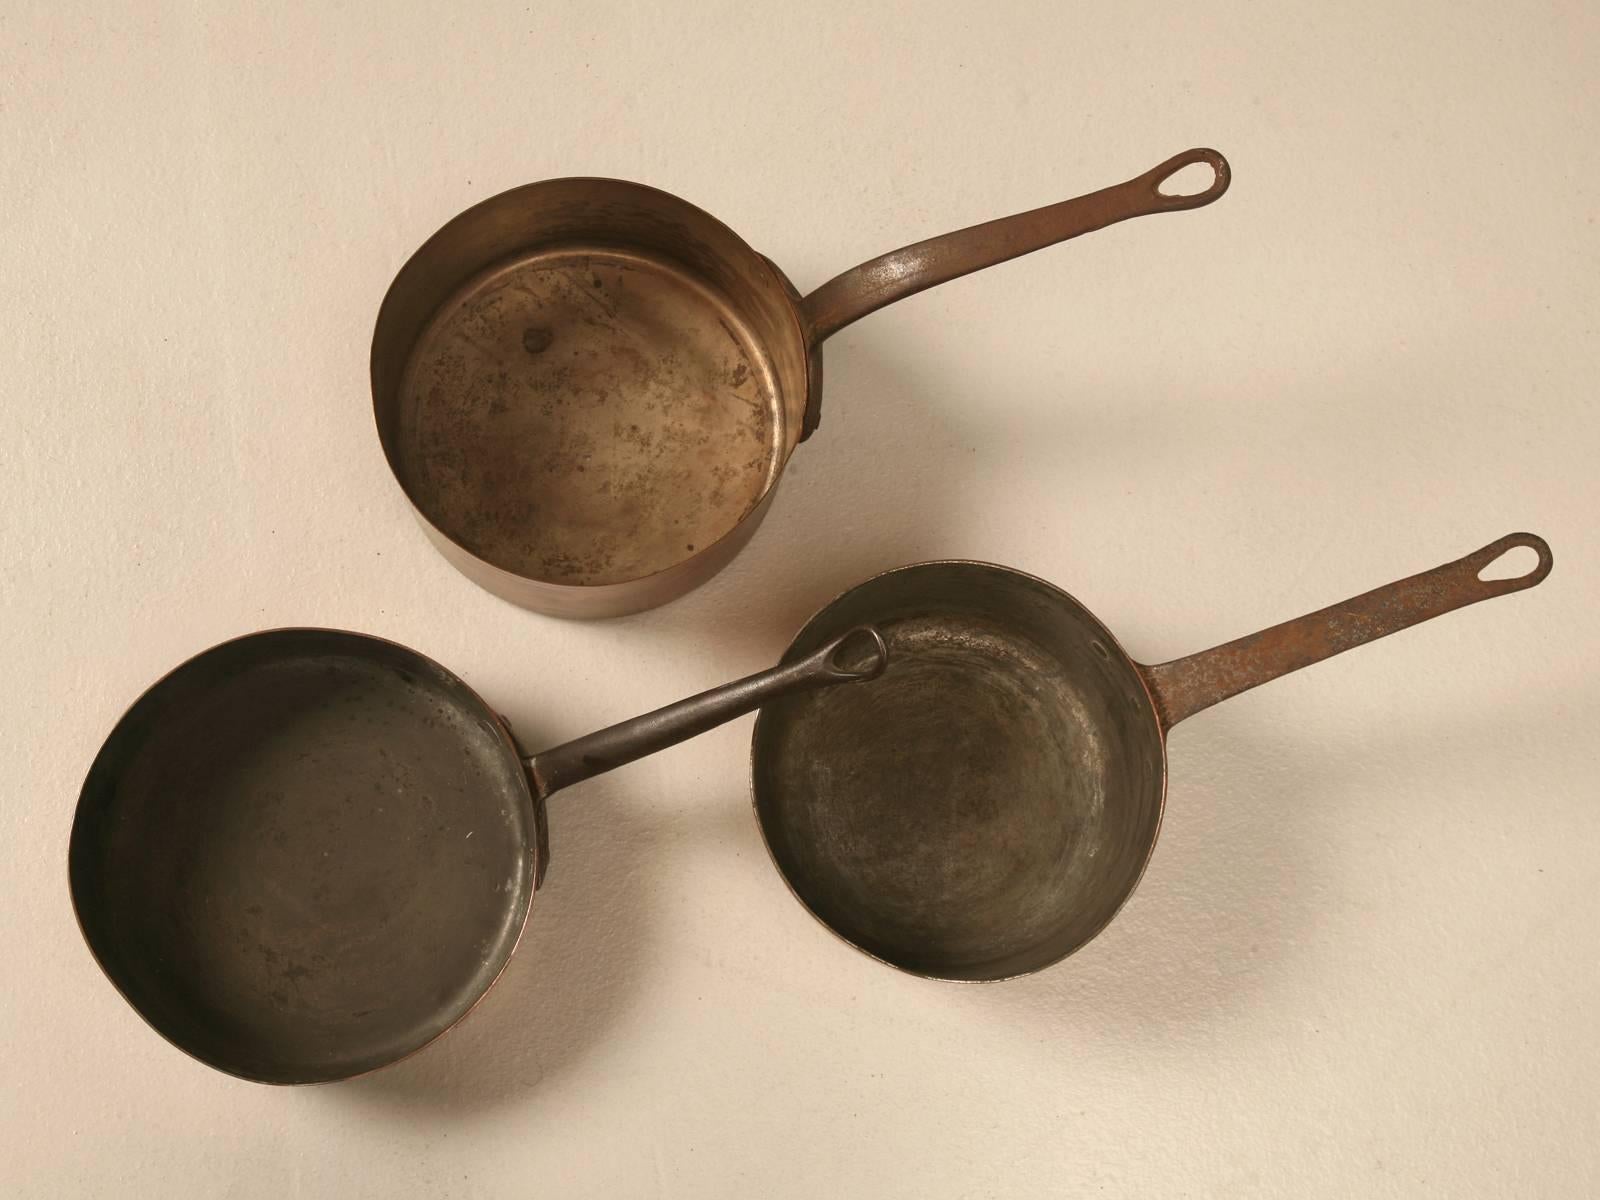 Set of three antique French copper pots and pans from the early 1800s to the mid-1800s, would be my best hypothesis on the age. Wonderful to decorate a country style kitchen, as we have done ourselves by hanging them from an old meat rack over the